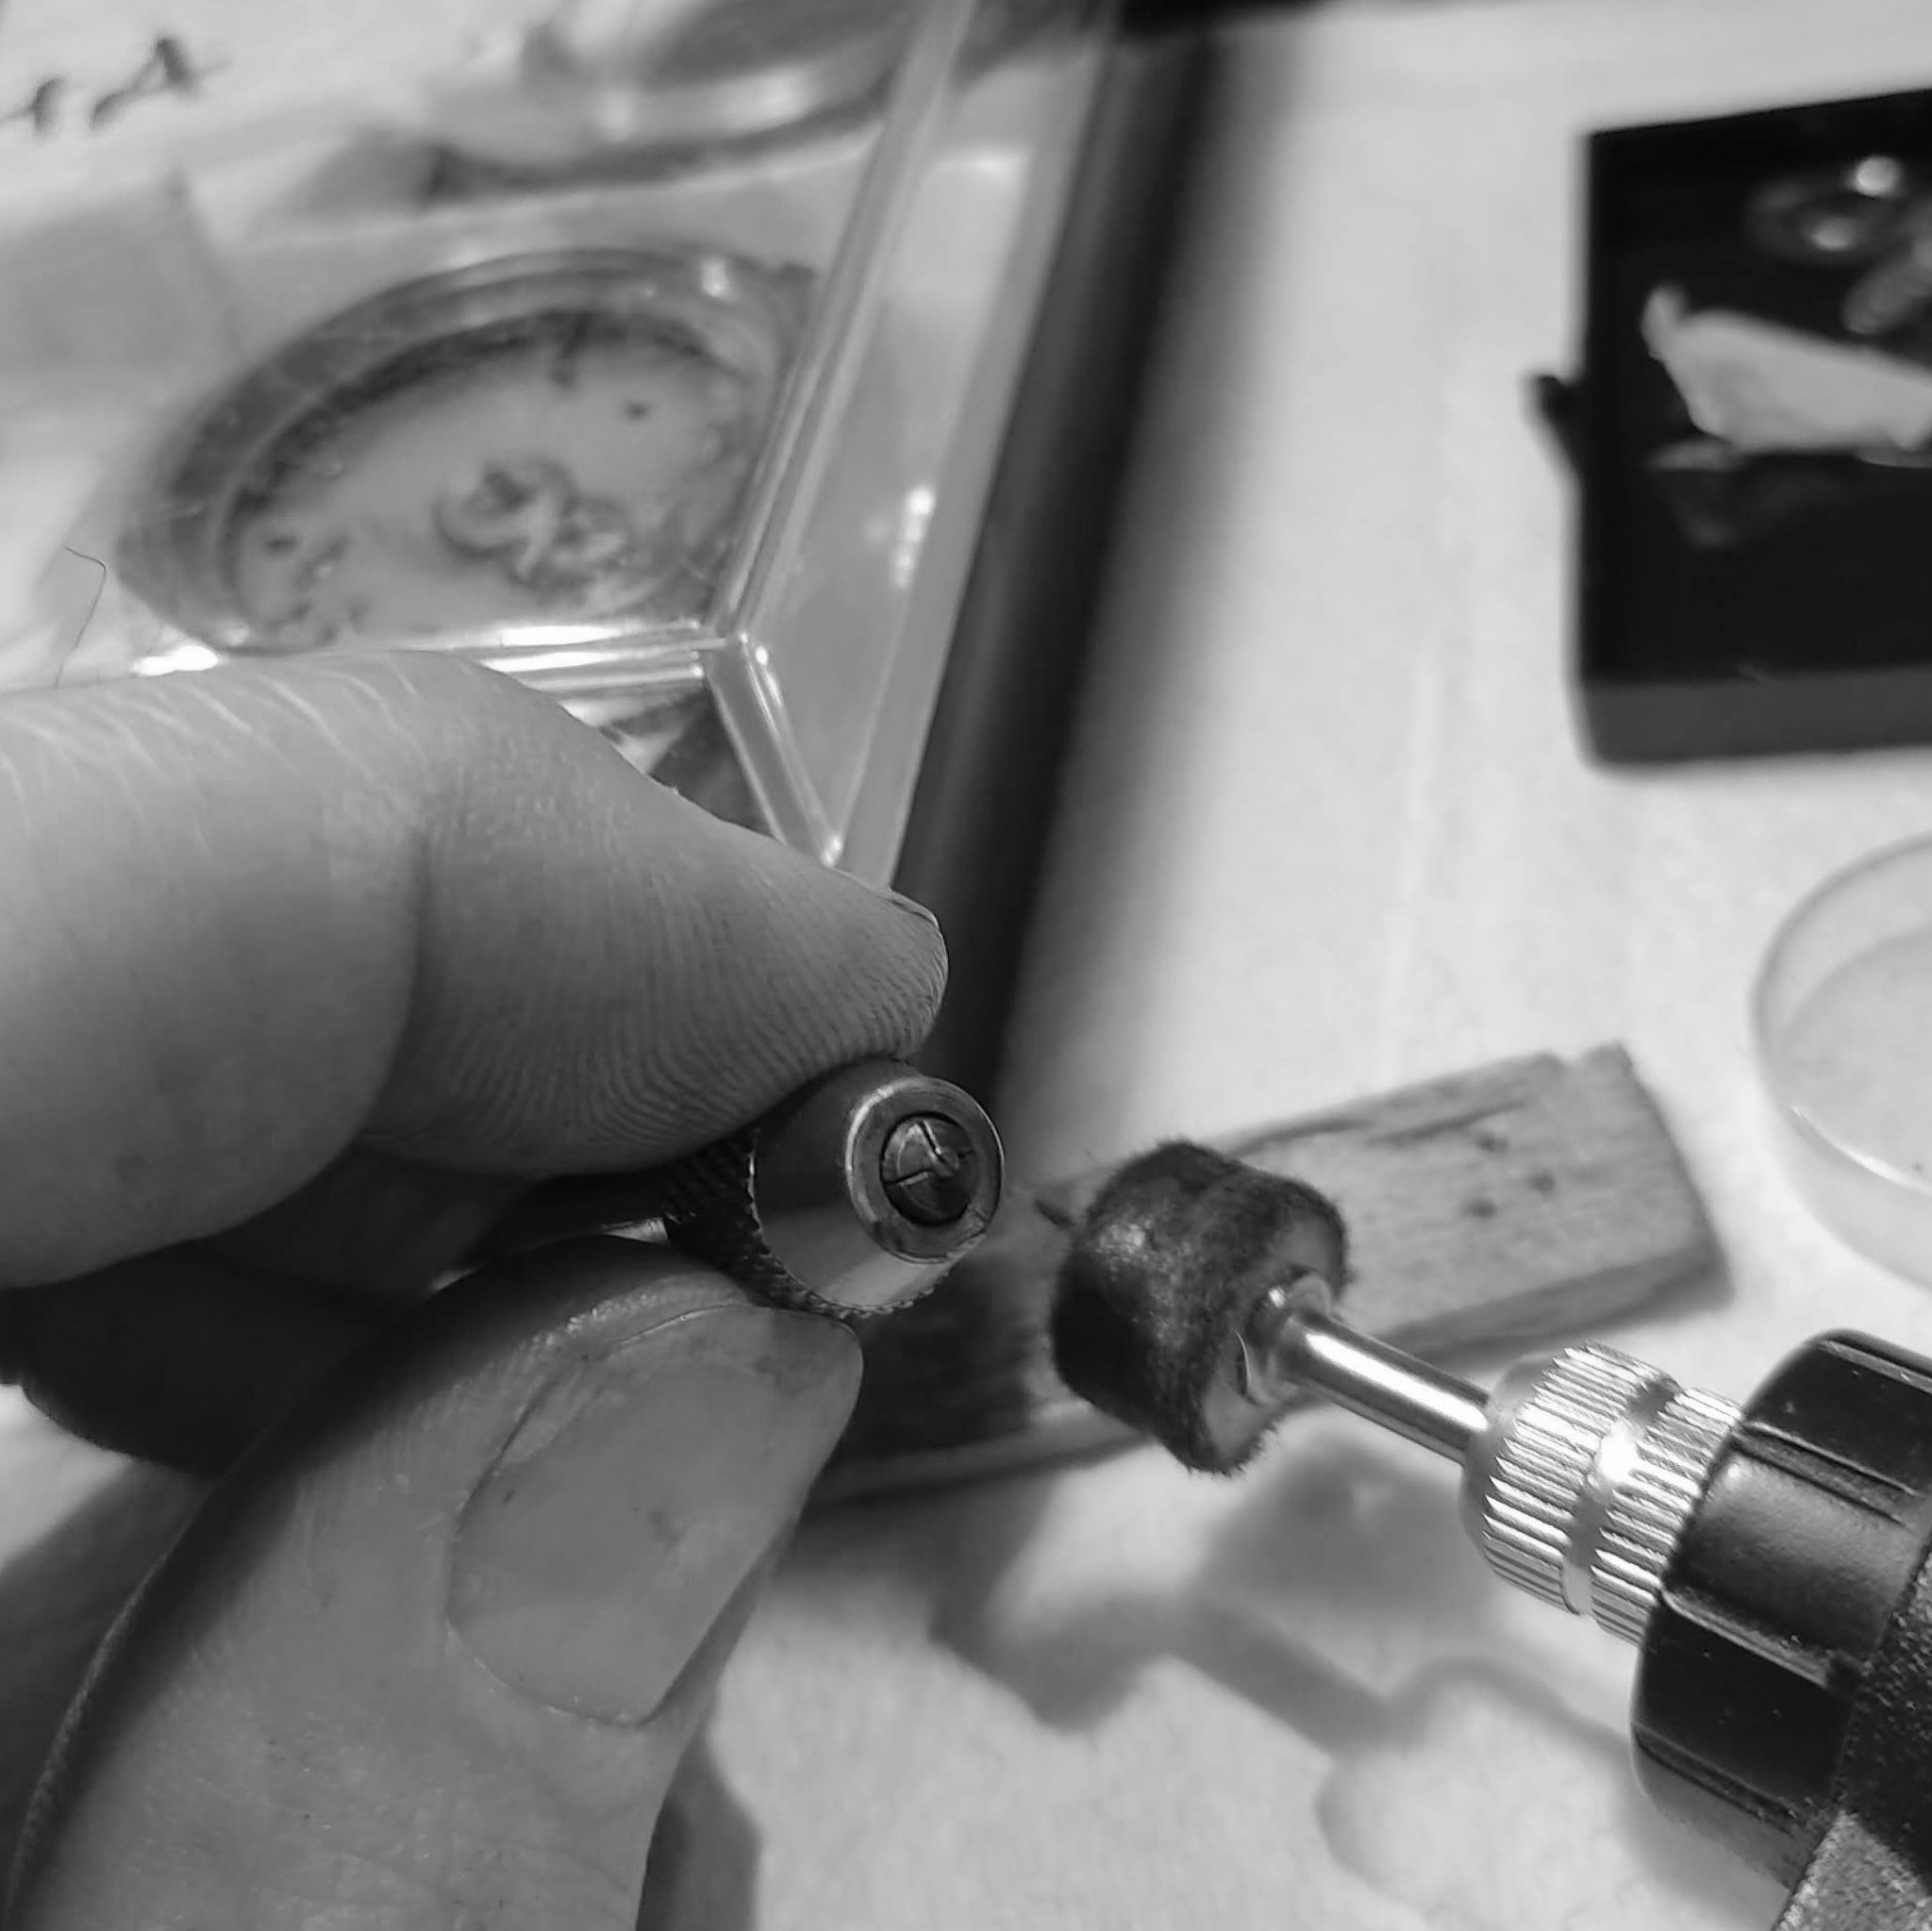 Here I polish a screw head. I will not fix deeply marred screw heads (there are none fortunately), but if it is over polished, it can change the slightly domed nature of the screw heards.